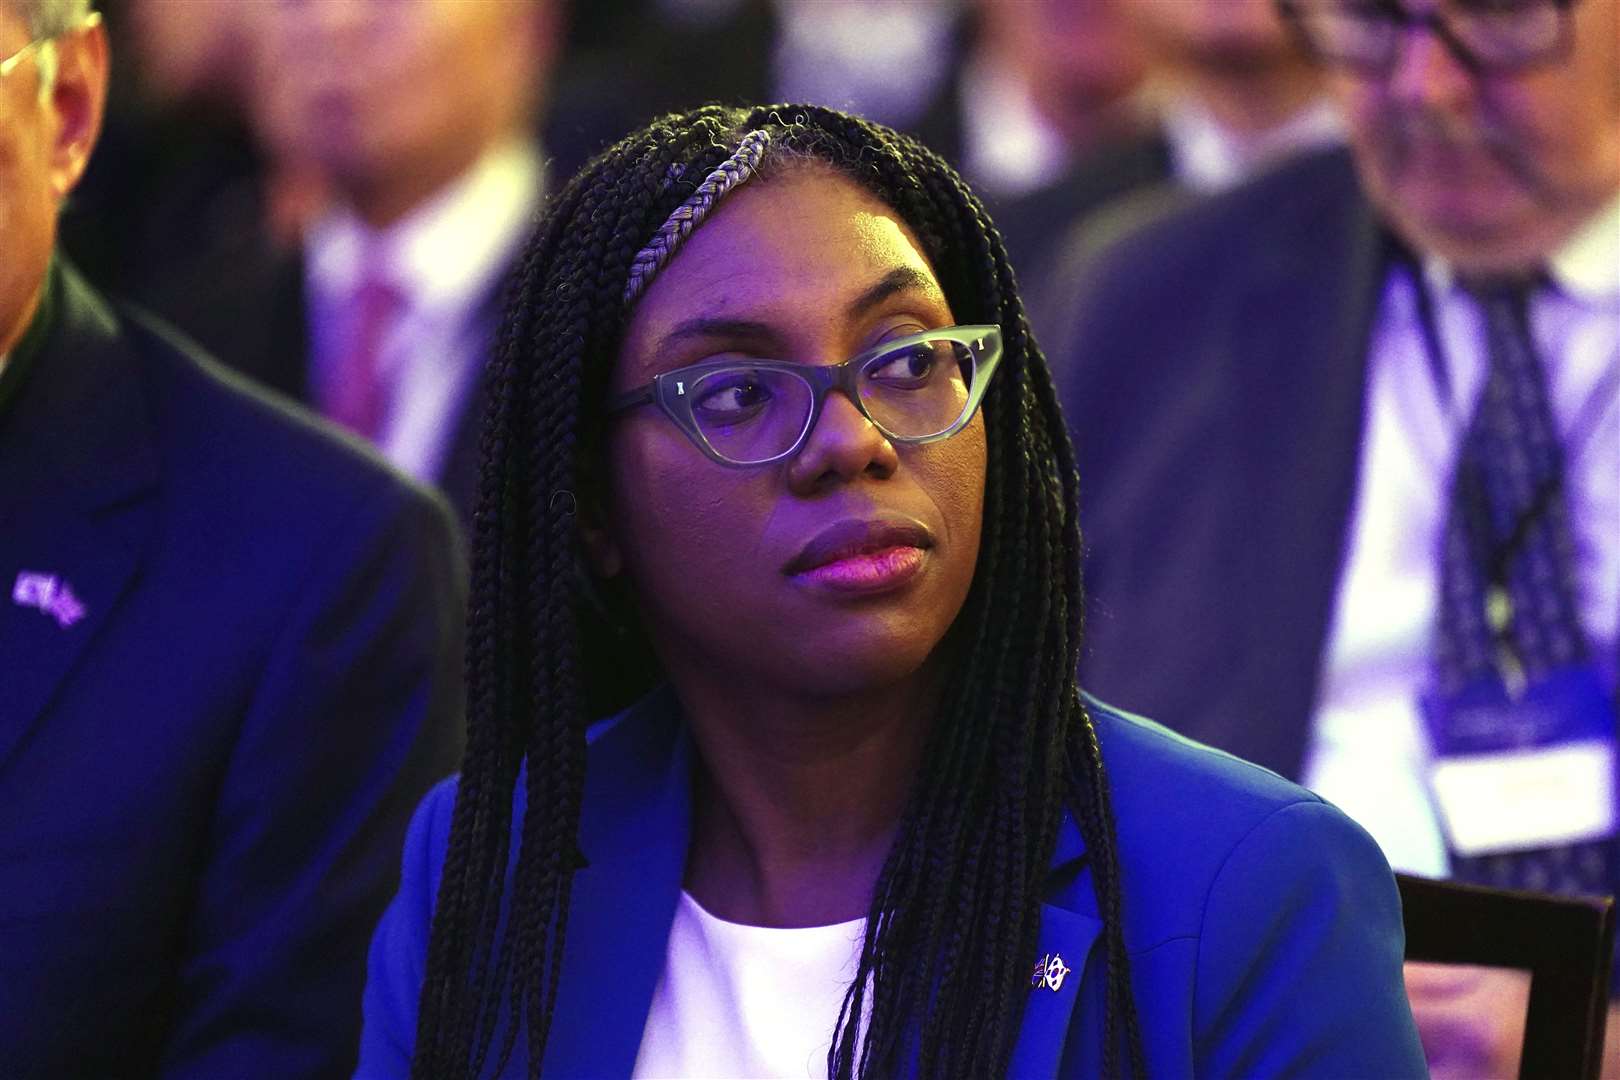 Kemi Badenoch hit back on Monday by telling MPs Mr Staunton had spread ‘made-up anecdotes’ following his dismissal (PA)